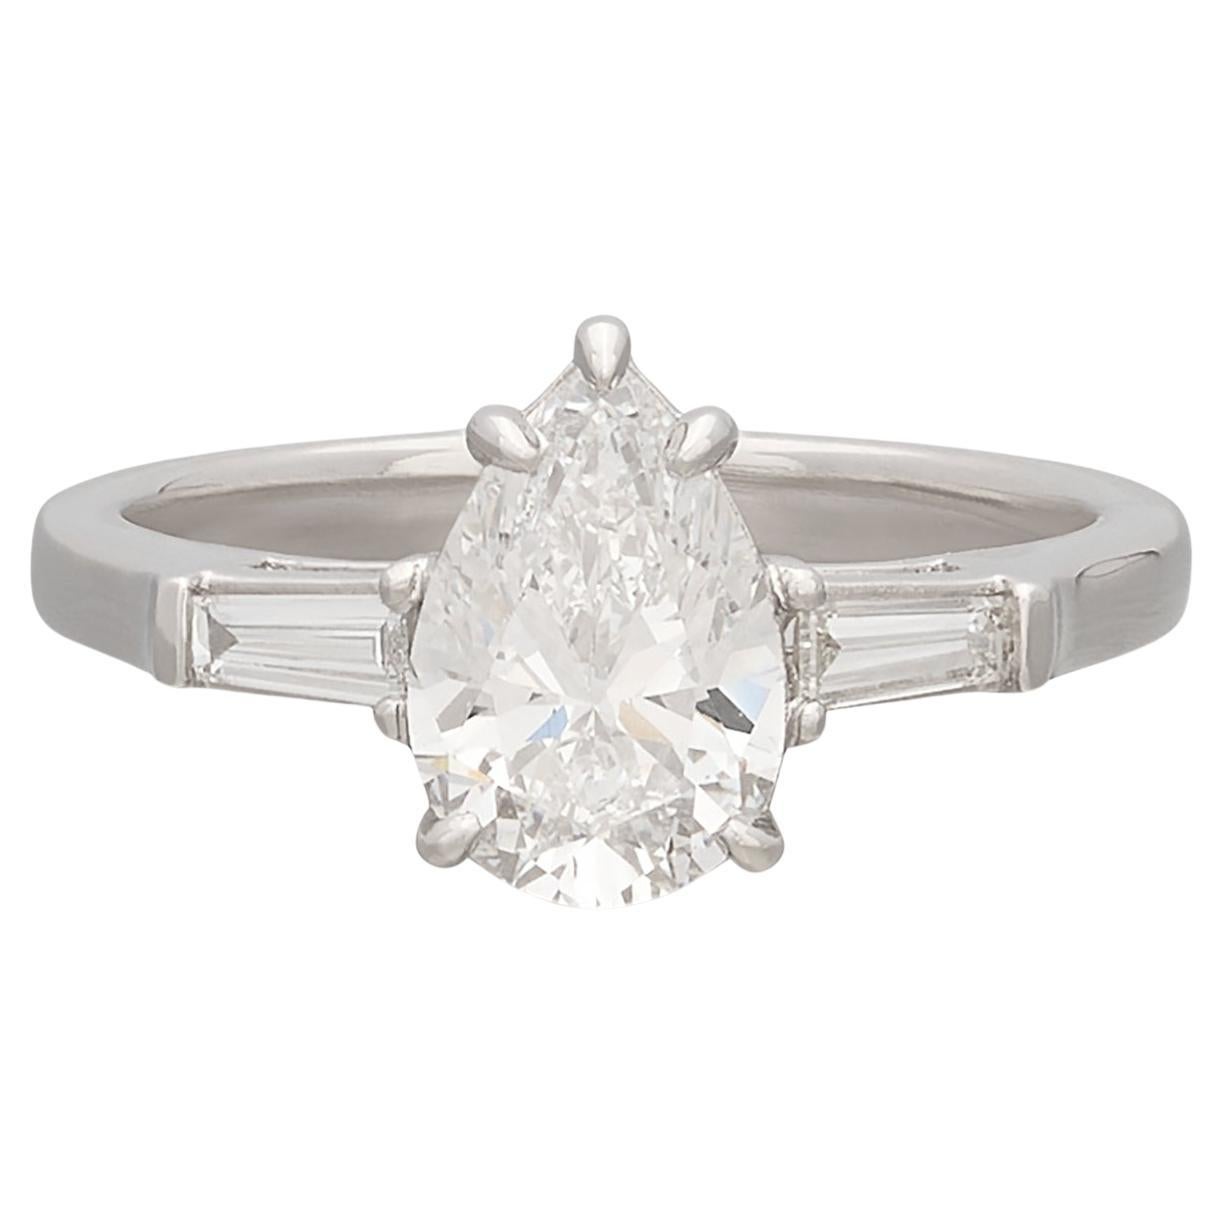 Incredible Platinum 1.50ct GIA D/Internally Flawless Pear Diamond Ring For Sale